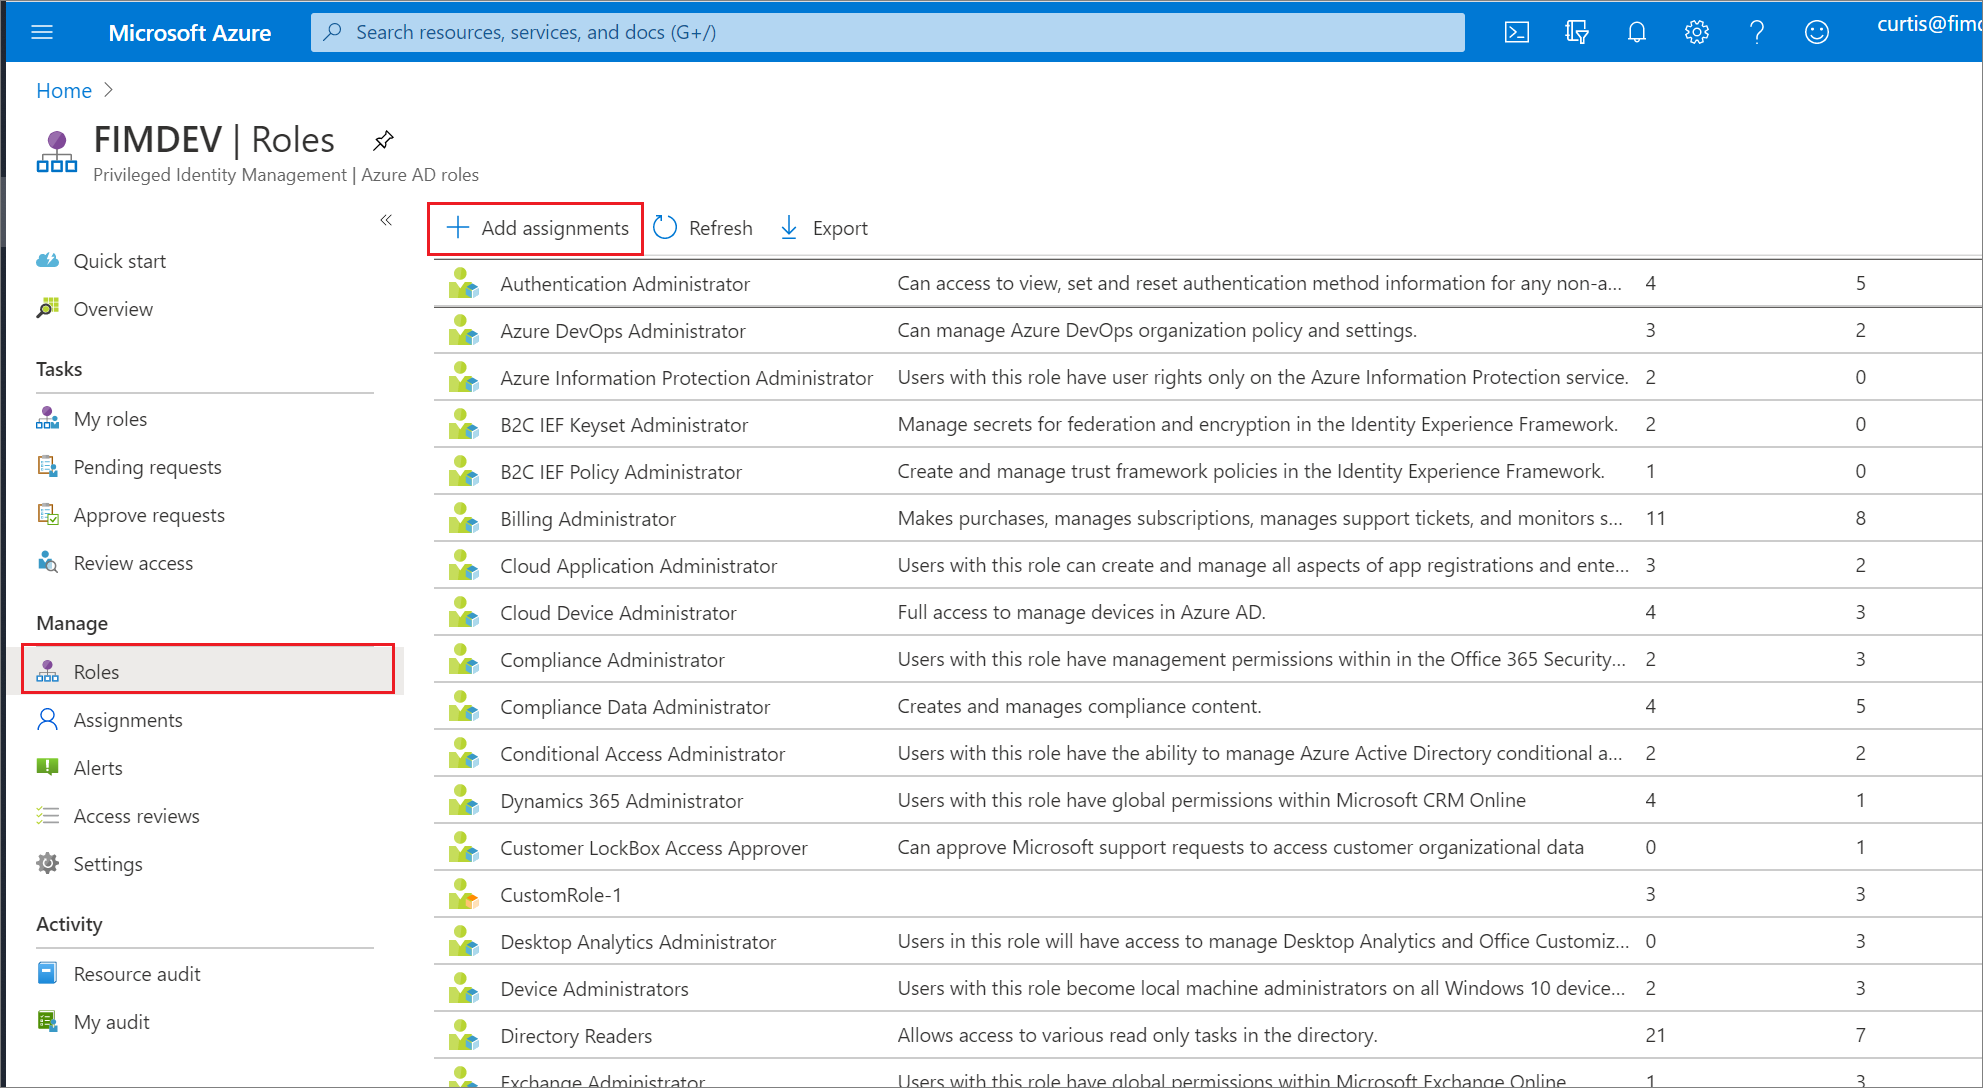 Screenshot of the Roles page with the Add assignments action selected.